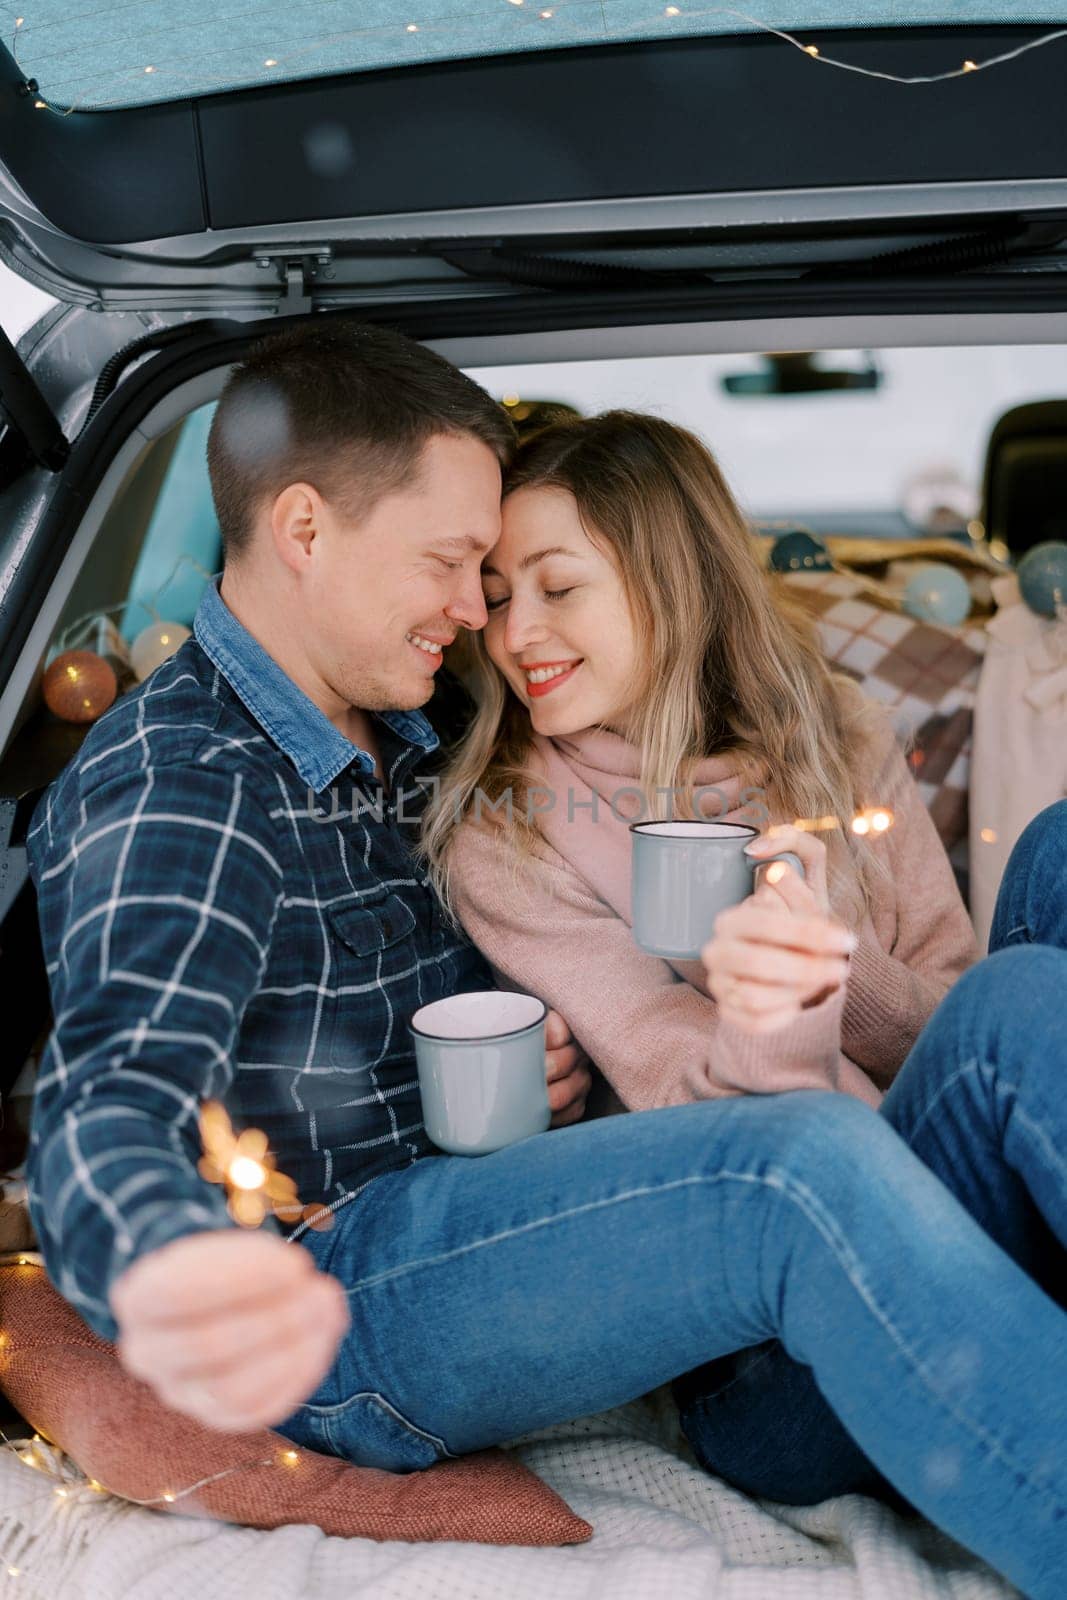 Smiling couple touching foreheads with mugs and sparklers while sitting in car trunk. High quality photo